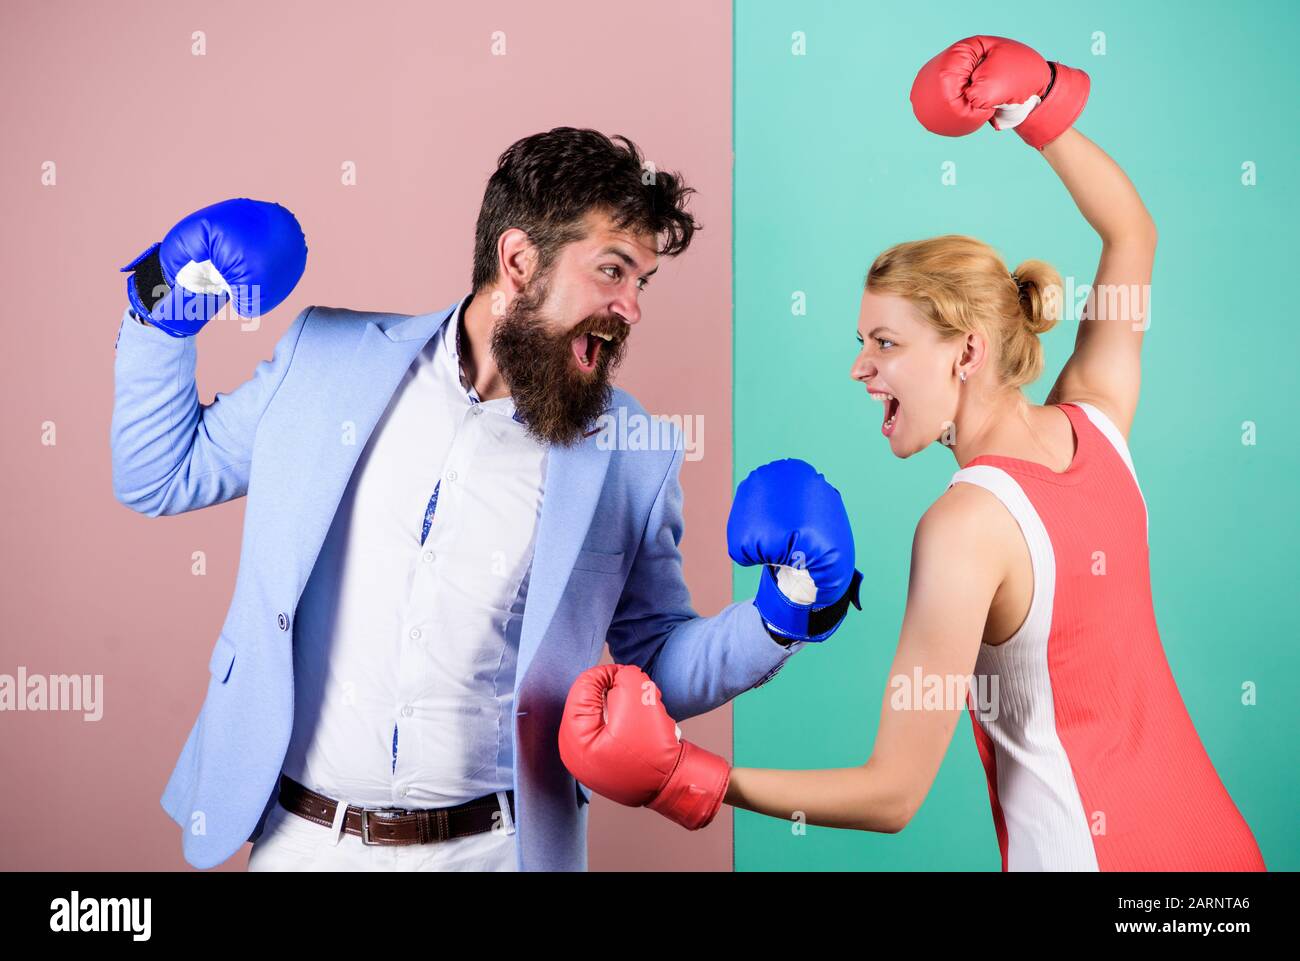 Conflict concept. Family quarrel. Boxers fighting in gloves. Domination concept. Gender battle. Gender equal rights. Gender equality. Man and woman boxing fight. Couple in love competing in boxing. Stock Photo